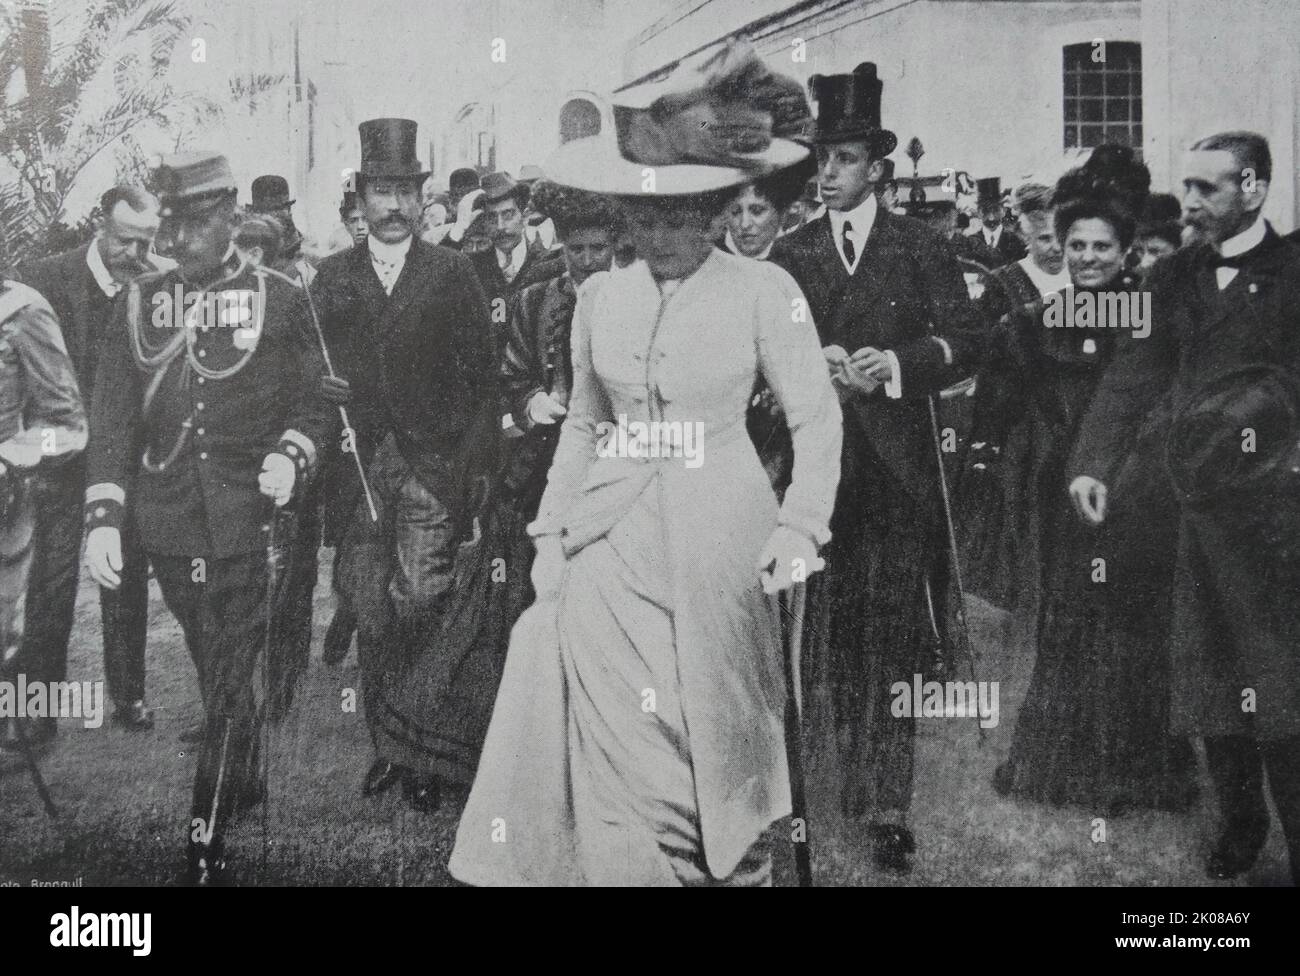 Dona Victoria Eugenie Julia Ena of Battenberg (24 October 1887 - 15 April 1969) was Queen of Spain as the wife of King Alfonso XIII from their marriage on 31 May 1906 until 14 April 1931, when the Spanish Second Republic was proclaimed Stock Photo